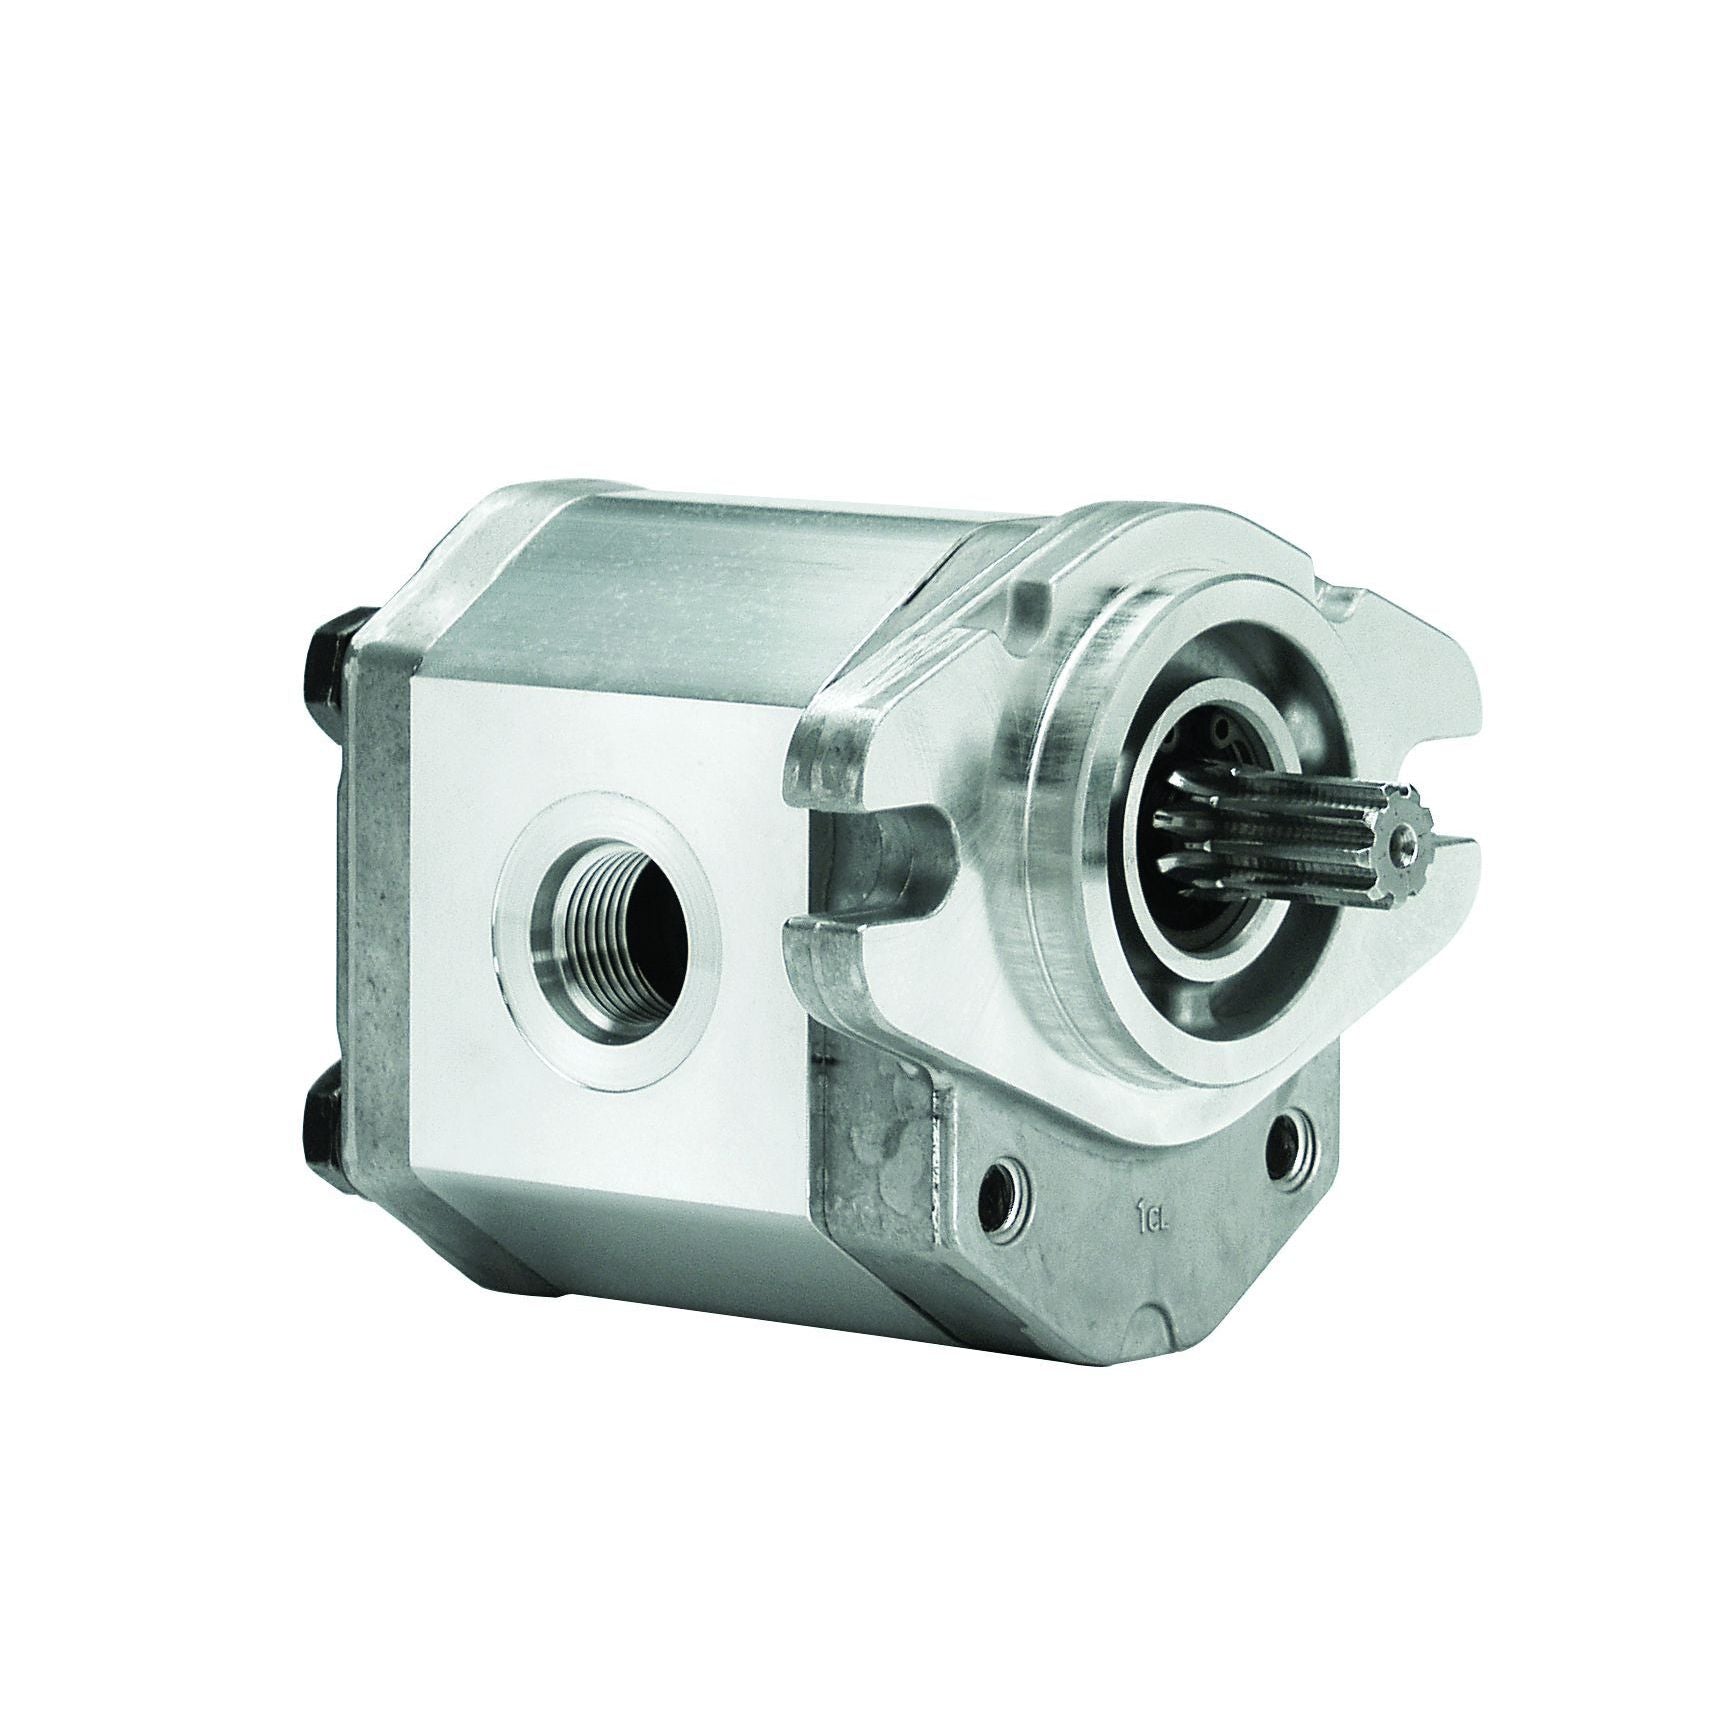 ALP2A-S-20-S1 : Marzocchi Gear Pump, CCW, 14.1cc (0.8601in3), 6.7 GPM, 3335psi, 3200 RPM, #12 SAE (3/4") In, #10 SAE (5/8") Out, Splined Shaft 9T 16/32DP, SAE A 2-Bolt Mount